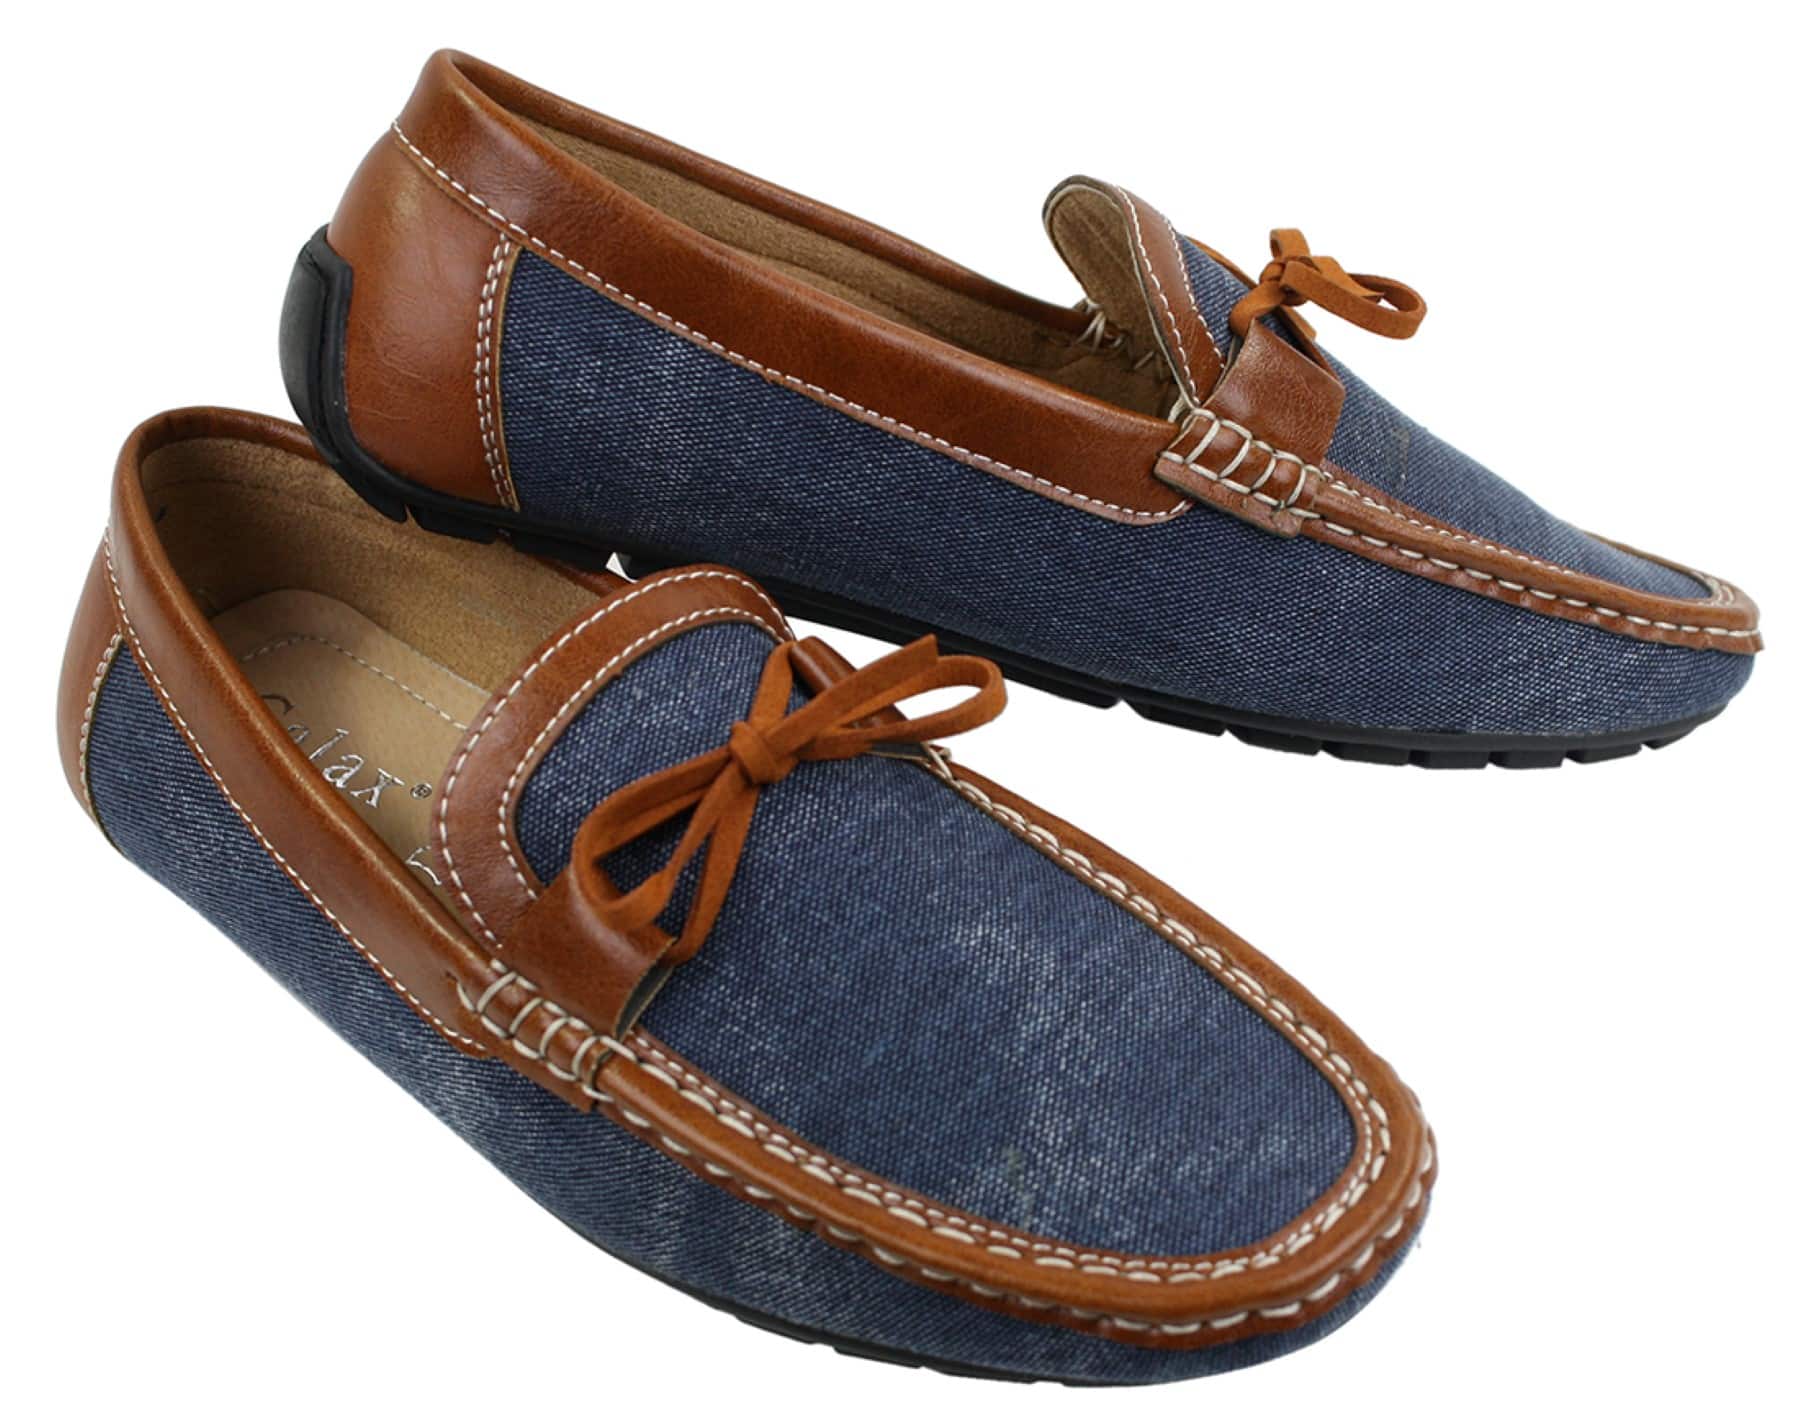 MENS LOAFERS DECK MOCCASIN DRIVING CASUAL PARTY ITALIAN SLIP ON SHOES 6-11 